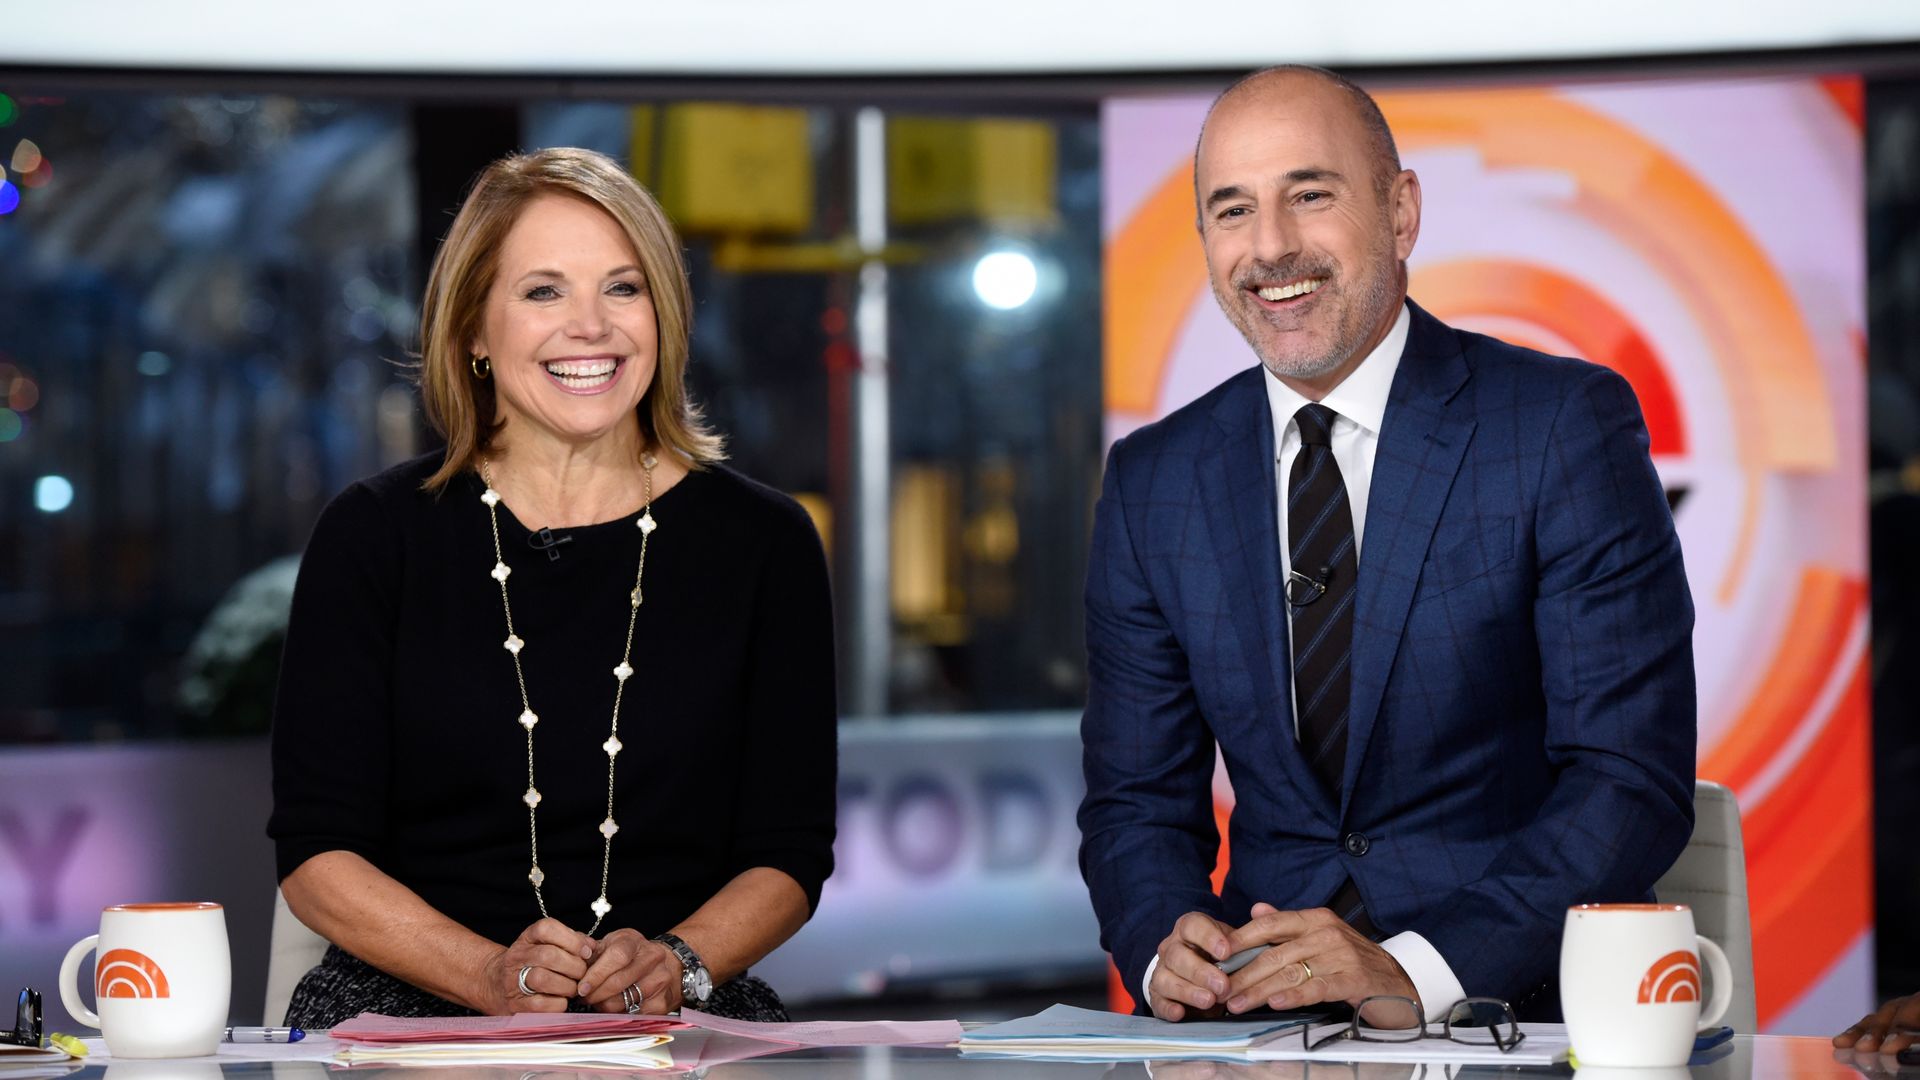 Matt Lauer's 20th Anniversary Celebration -- Pictured: (l-r) Katie Couric and anchor Matt Lauer on Friday, January 6, 2017